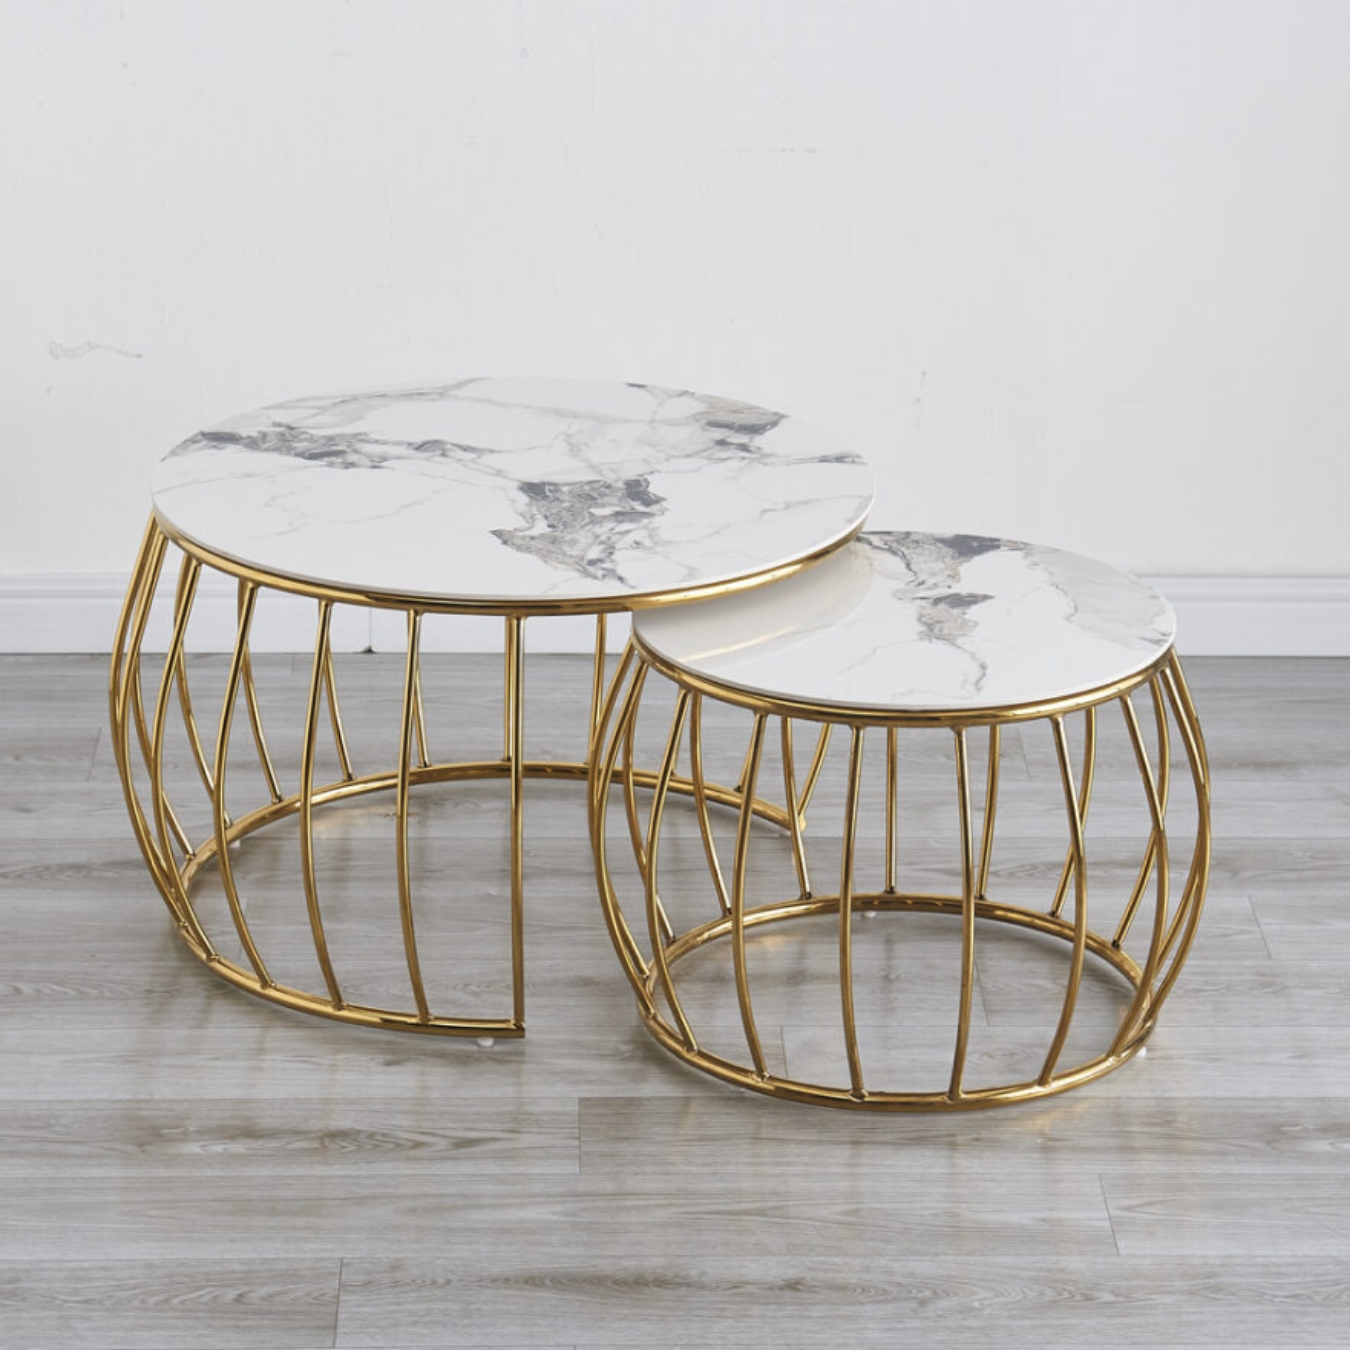 This Glen Coffee table is the perfect addition to any modern inspired kitchen or dining room and is available in two sizes.